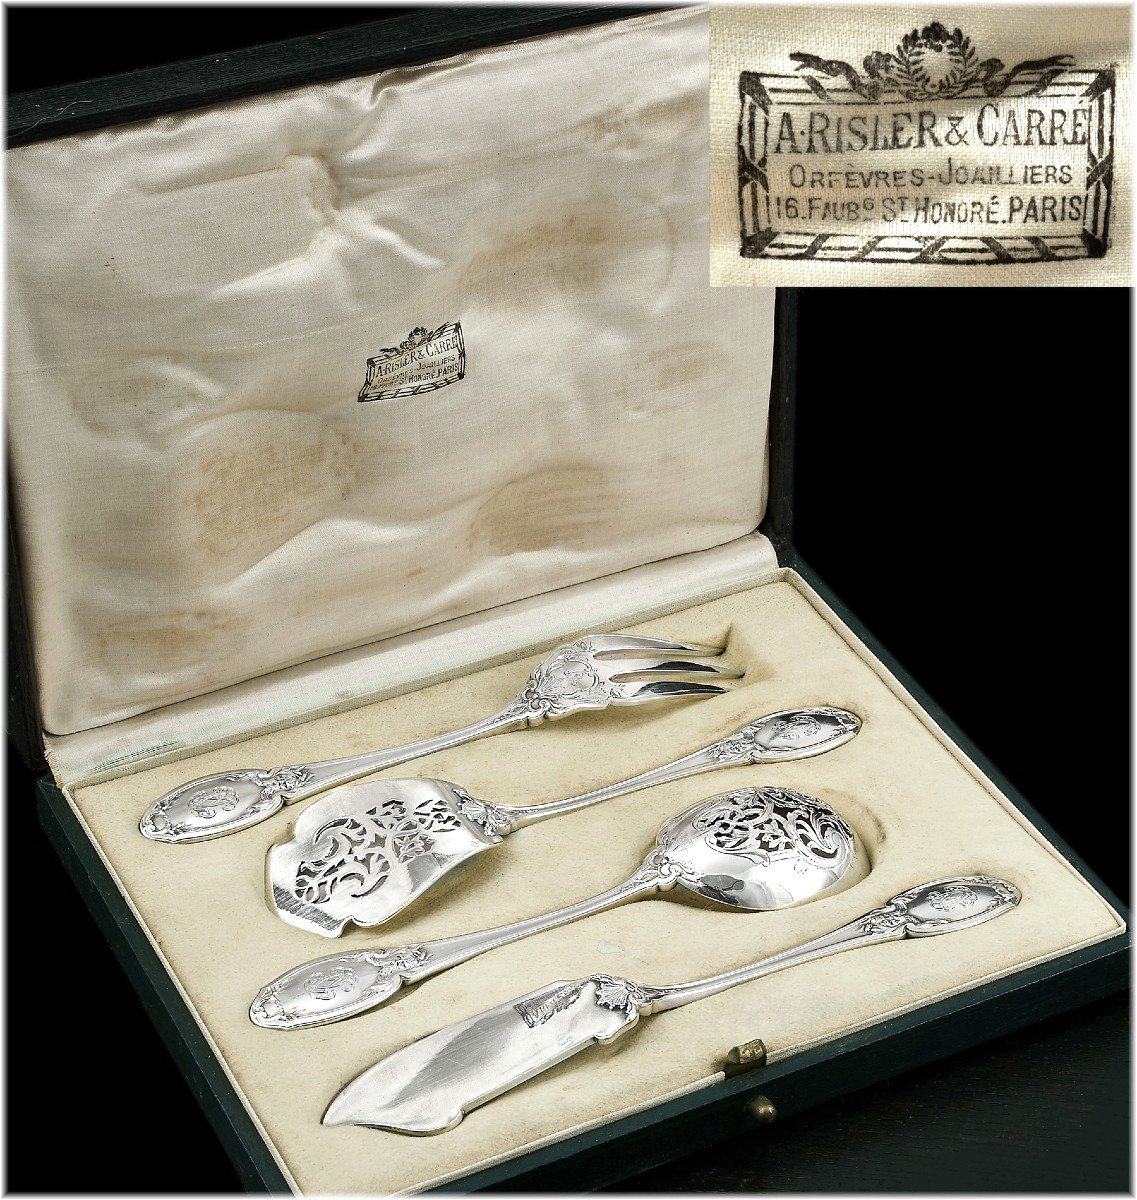 Risler & Carre : Antique French Sterling Silver Hors d'Oeuvre Serving Set Mascarons / Greenman  - Original Box -photo-2